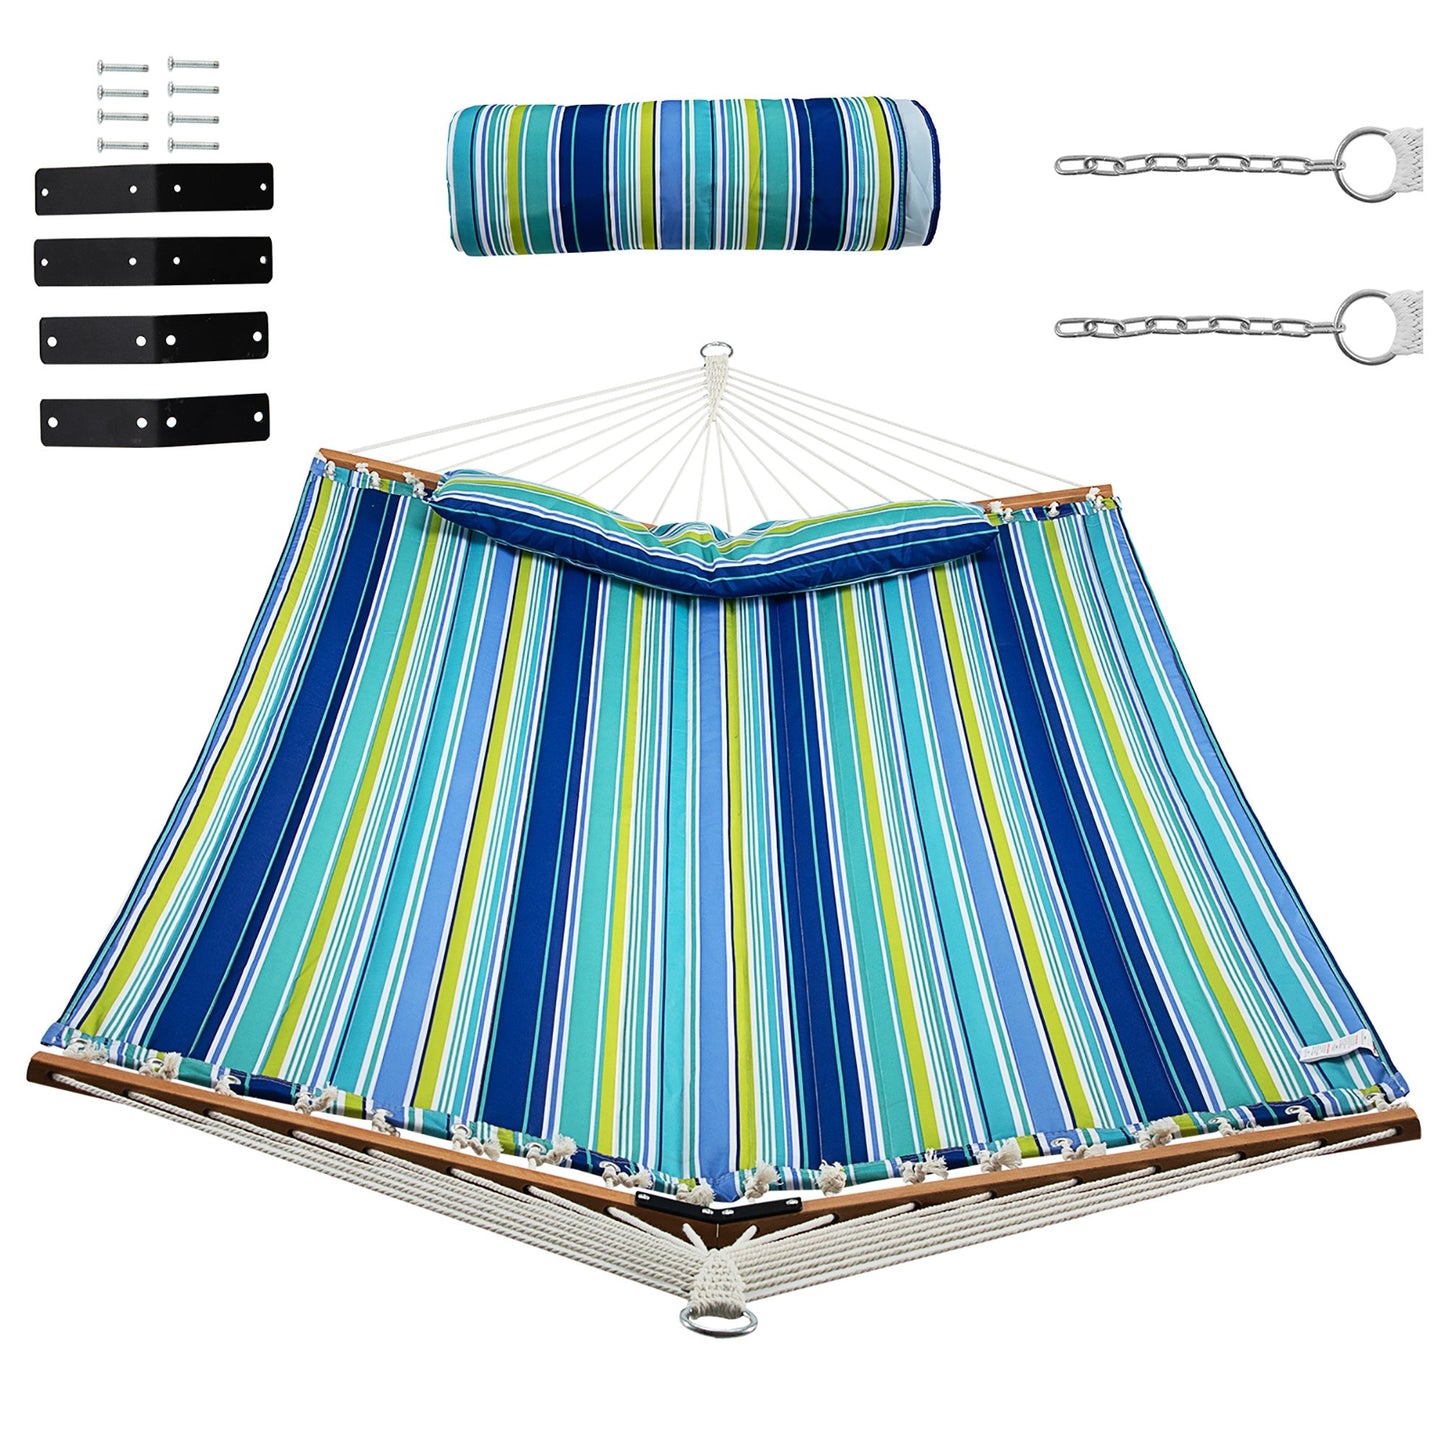 Patio Hammock Foldable Portable Swing Chair Bed with Detachable Pillow, Blue & Green